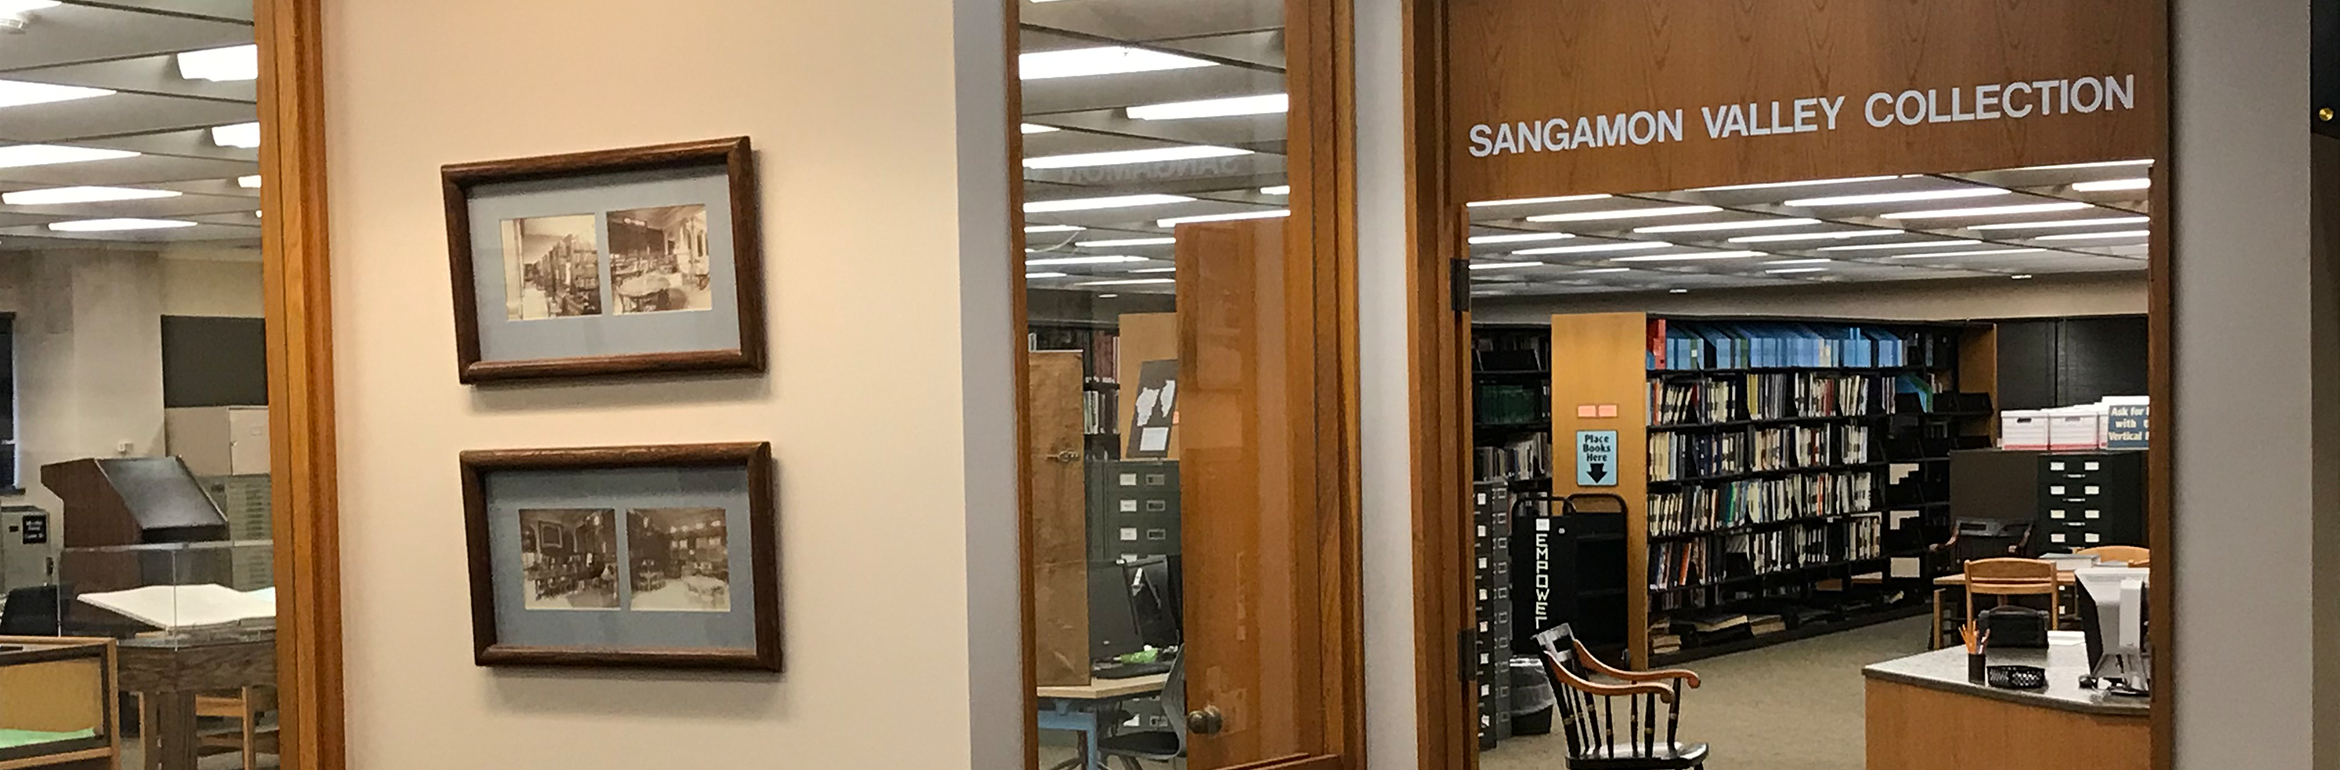 image of the entrance to the Sangamon Valley Collection department